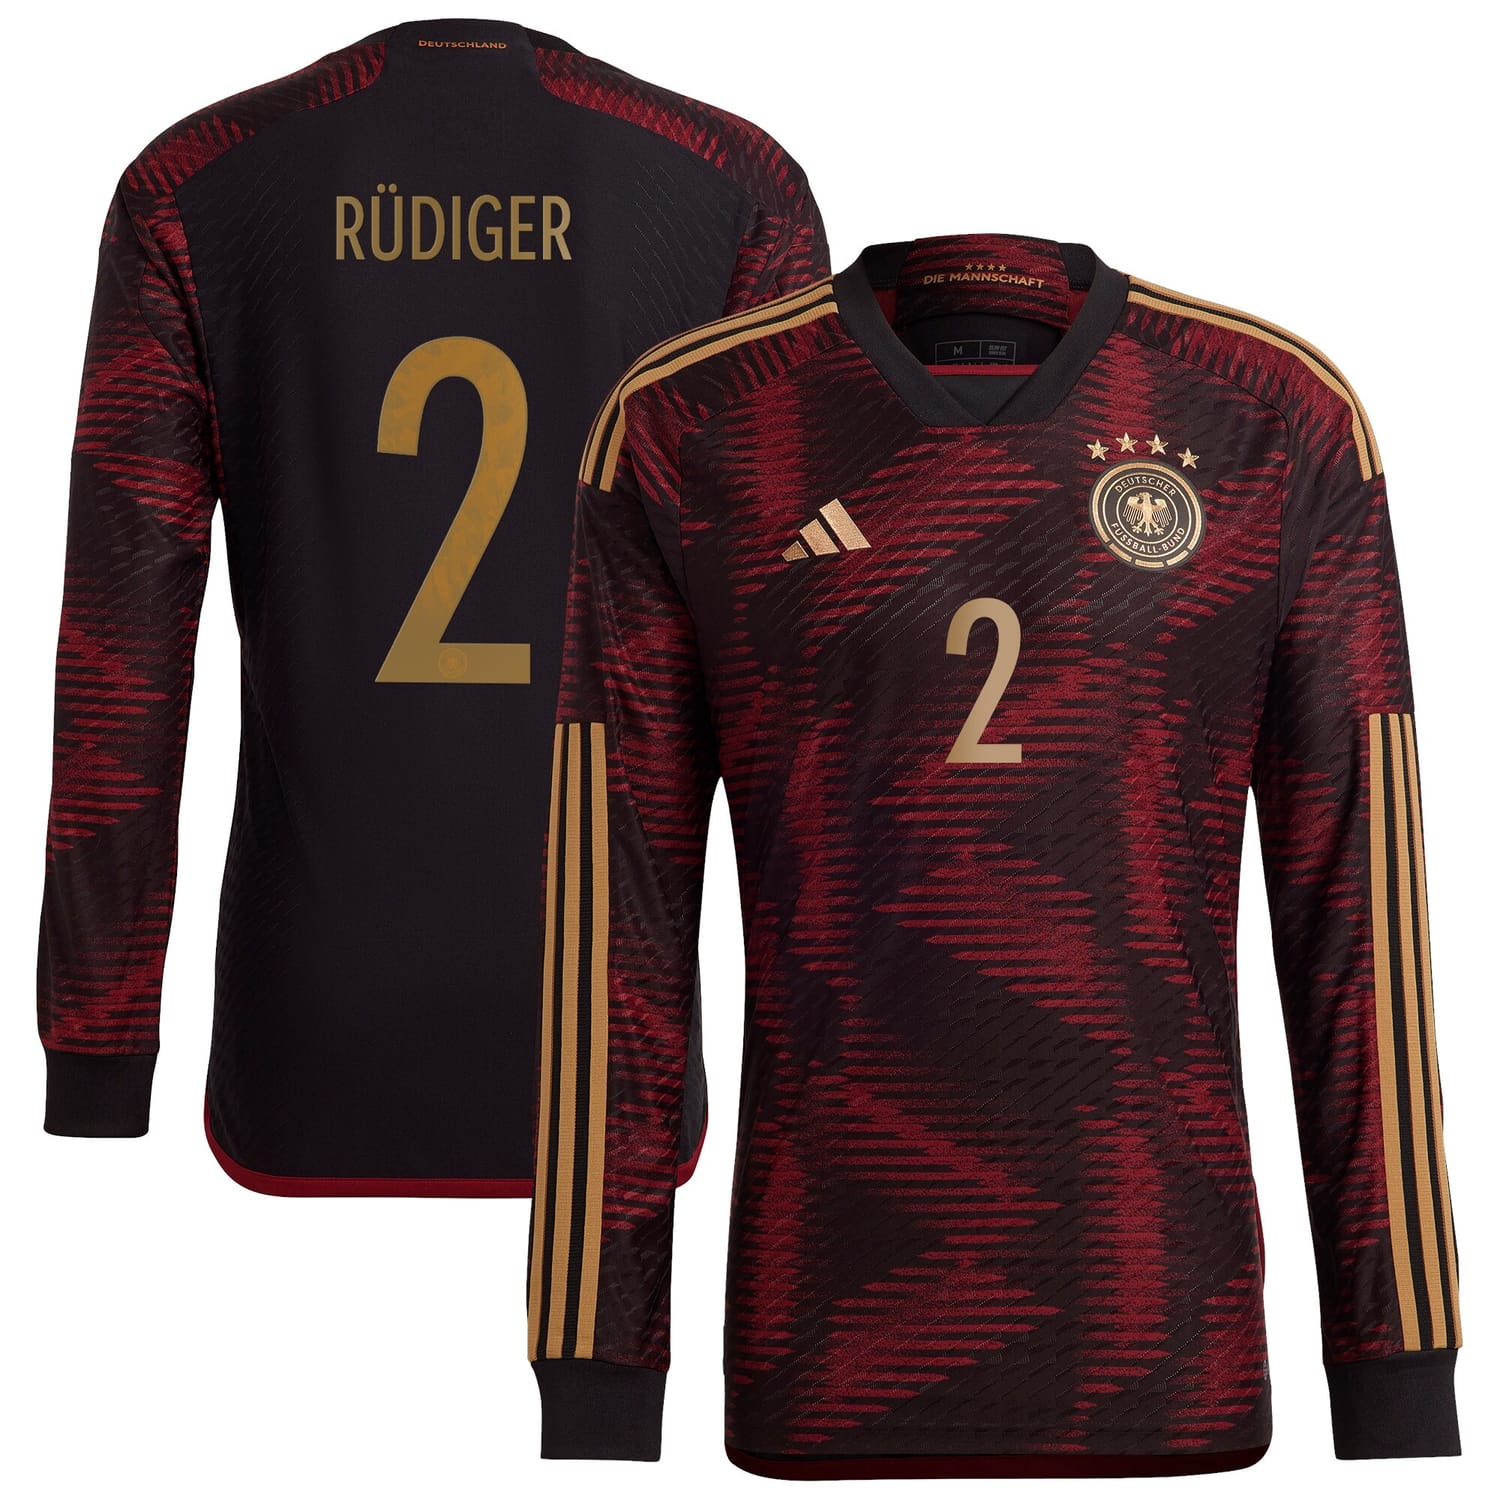 Germany National Team Away Authentic Jersey Shirt Long Sleeve player Antonio Rüdiger 2 printing for Men